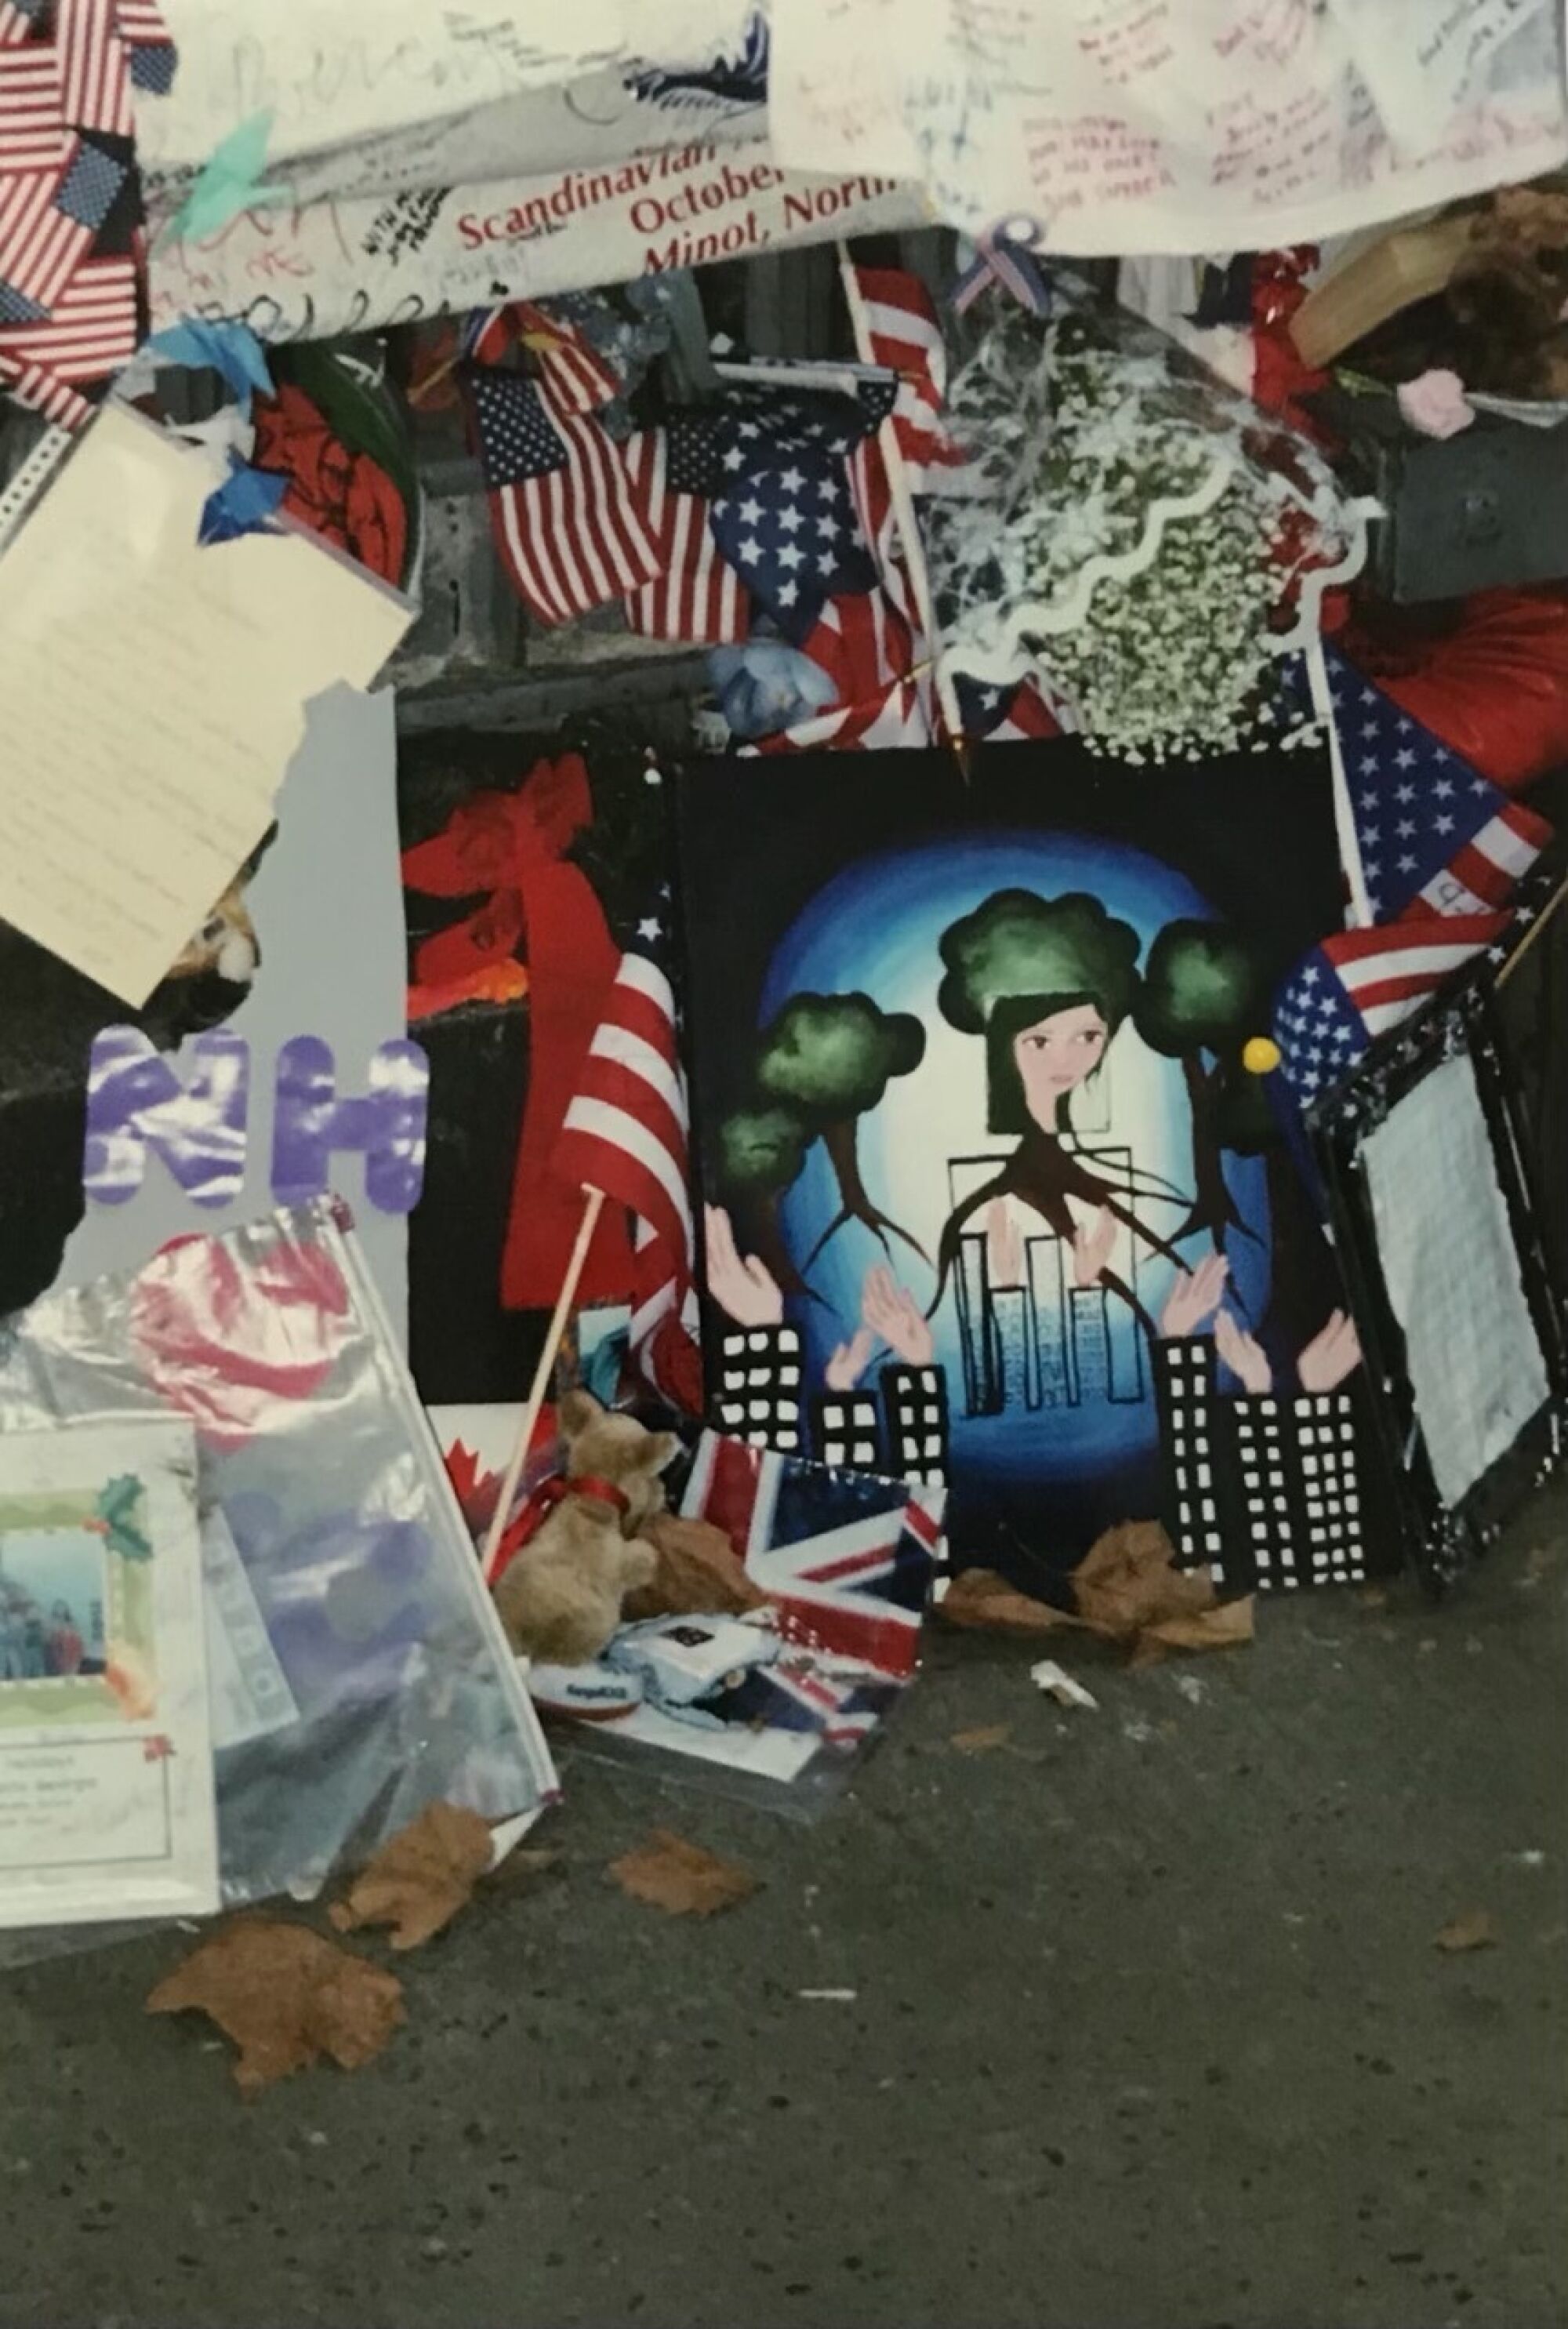 A shrine sits on the ground for Sept. 11, 2001.